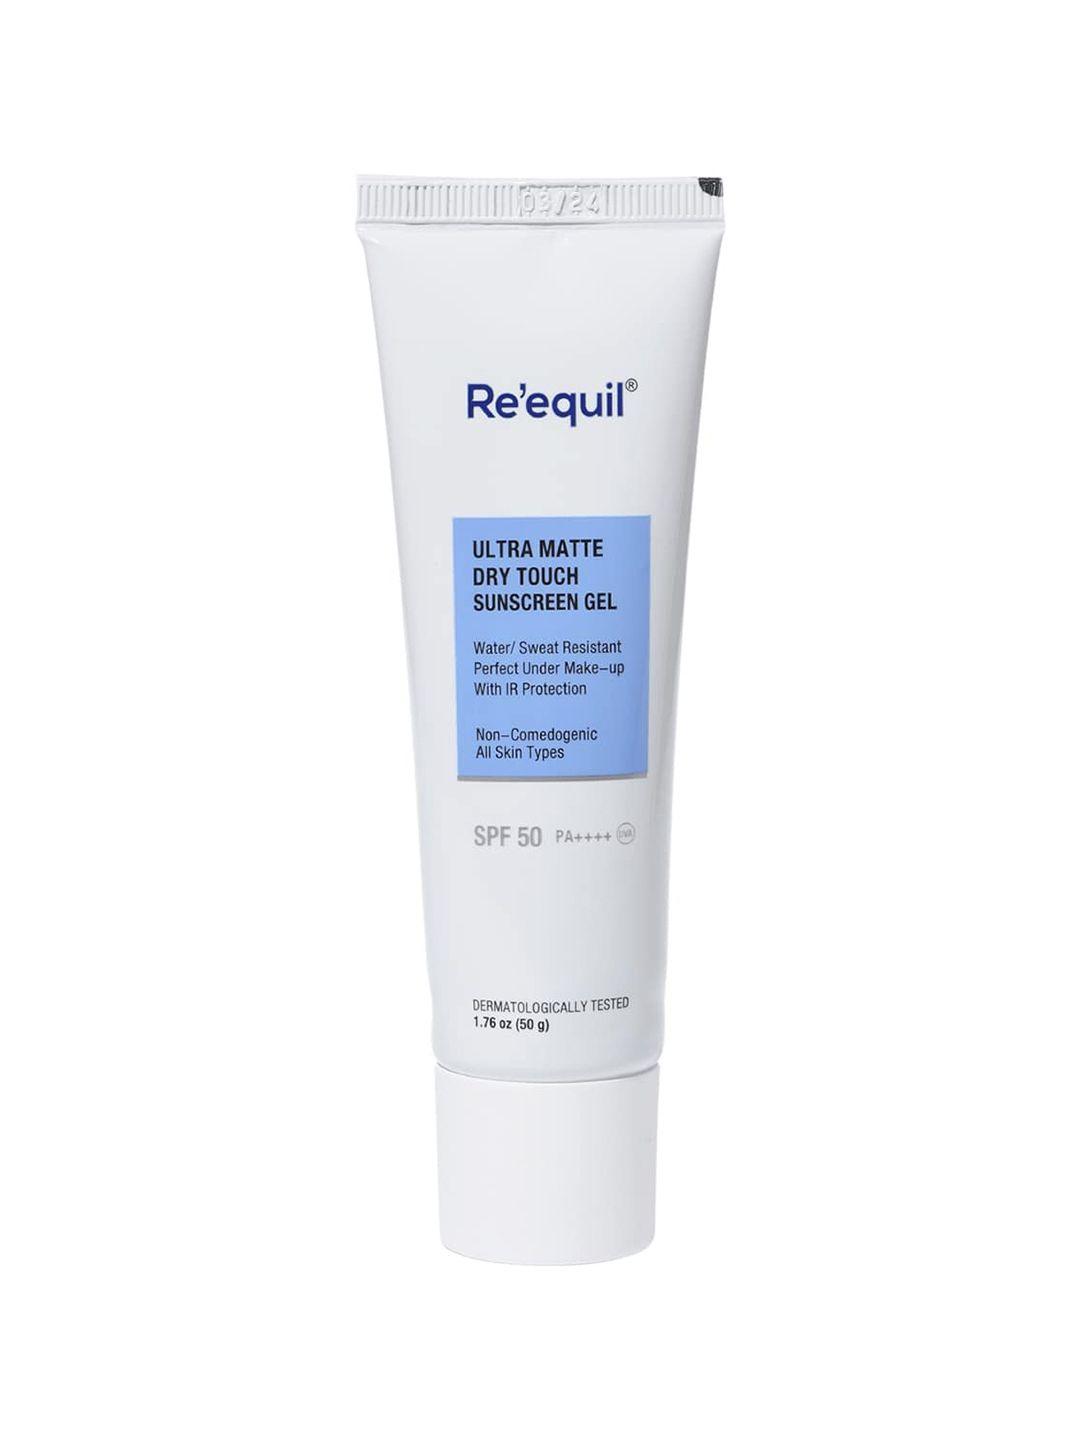 reequil ultra matte dry touch sunscreen gel spf 50 pa++++ 50g